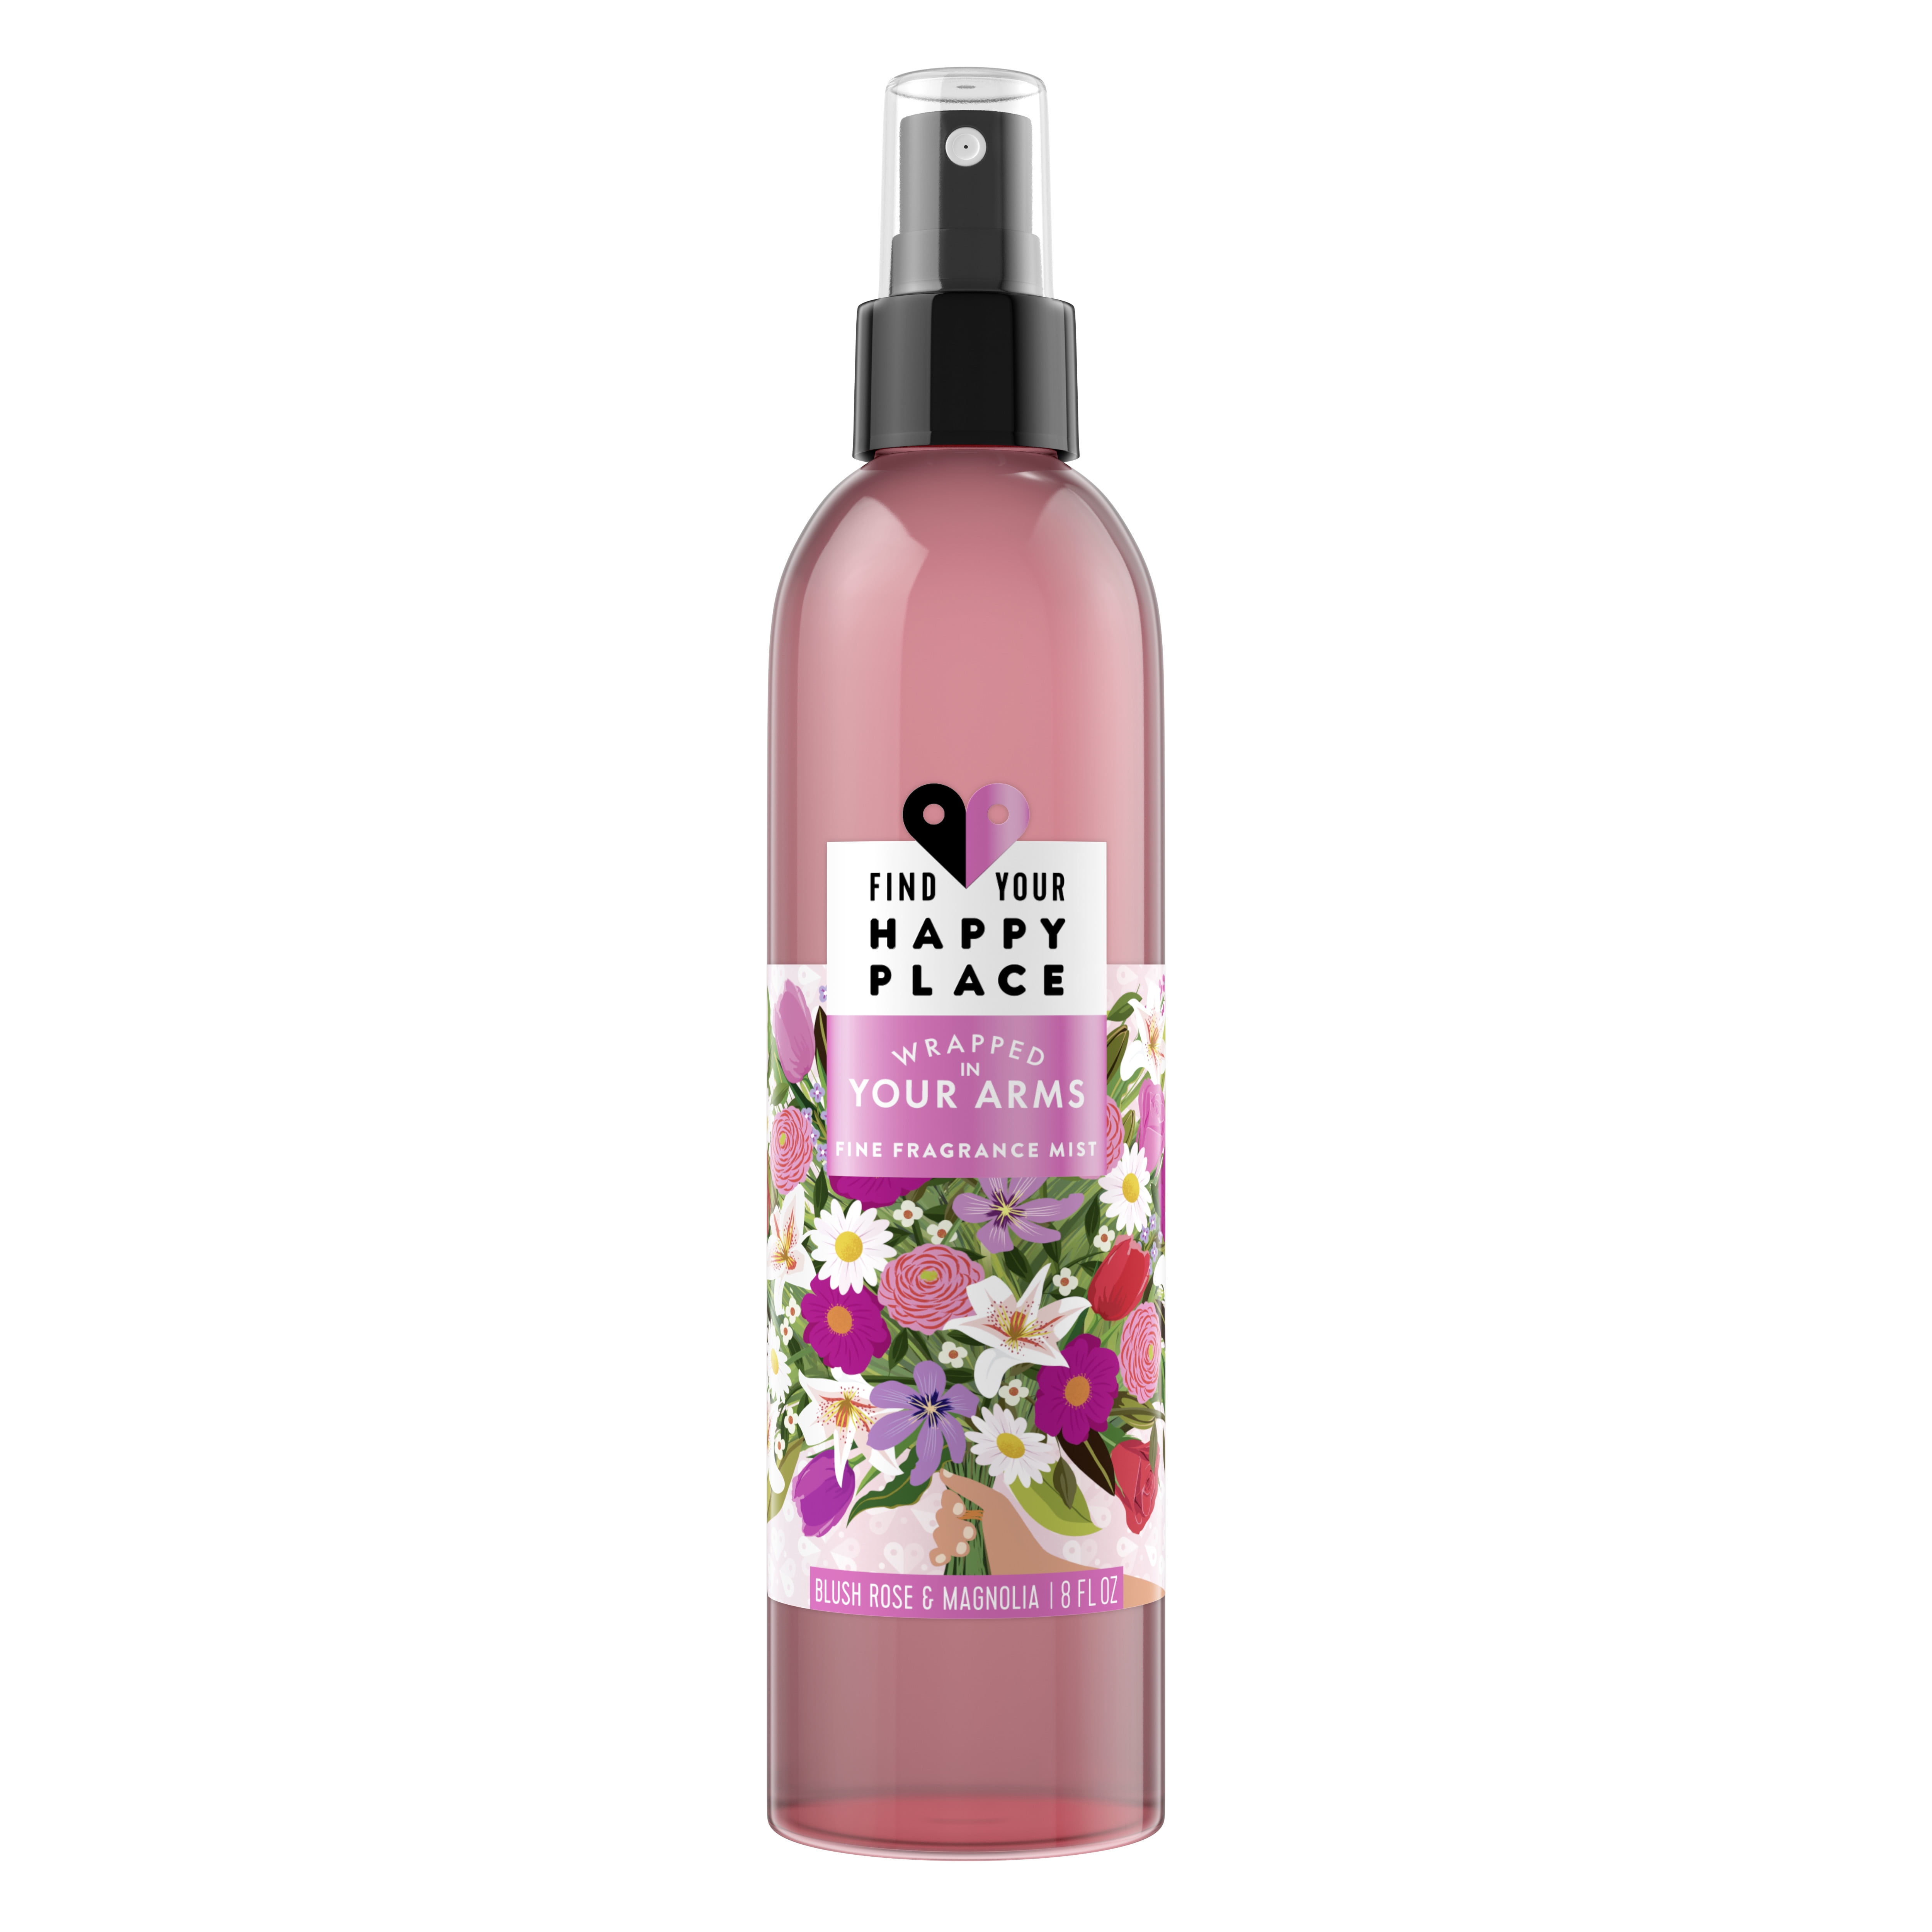 Find Your Happy Place Wrapped In Your Arms Body Spray for Women, 8 Oz